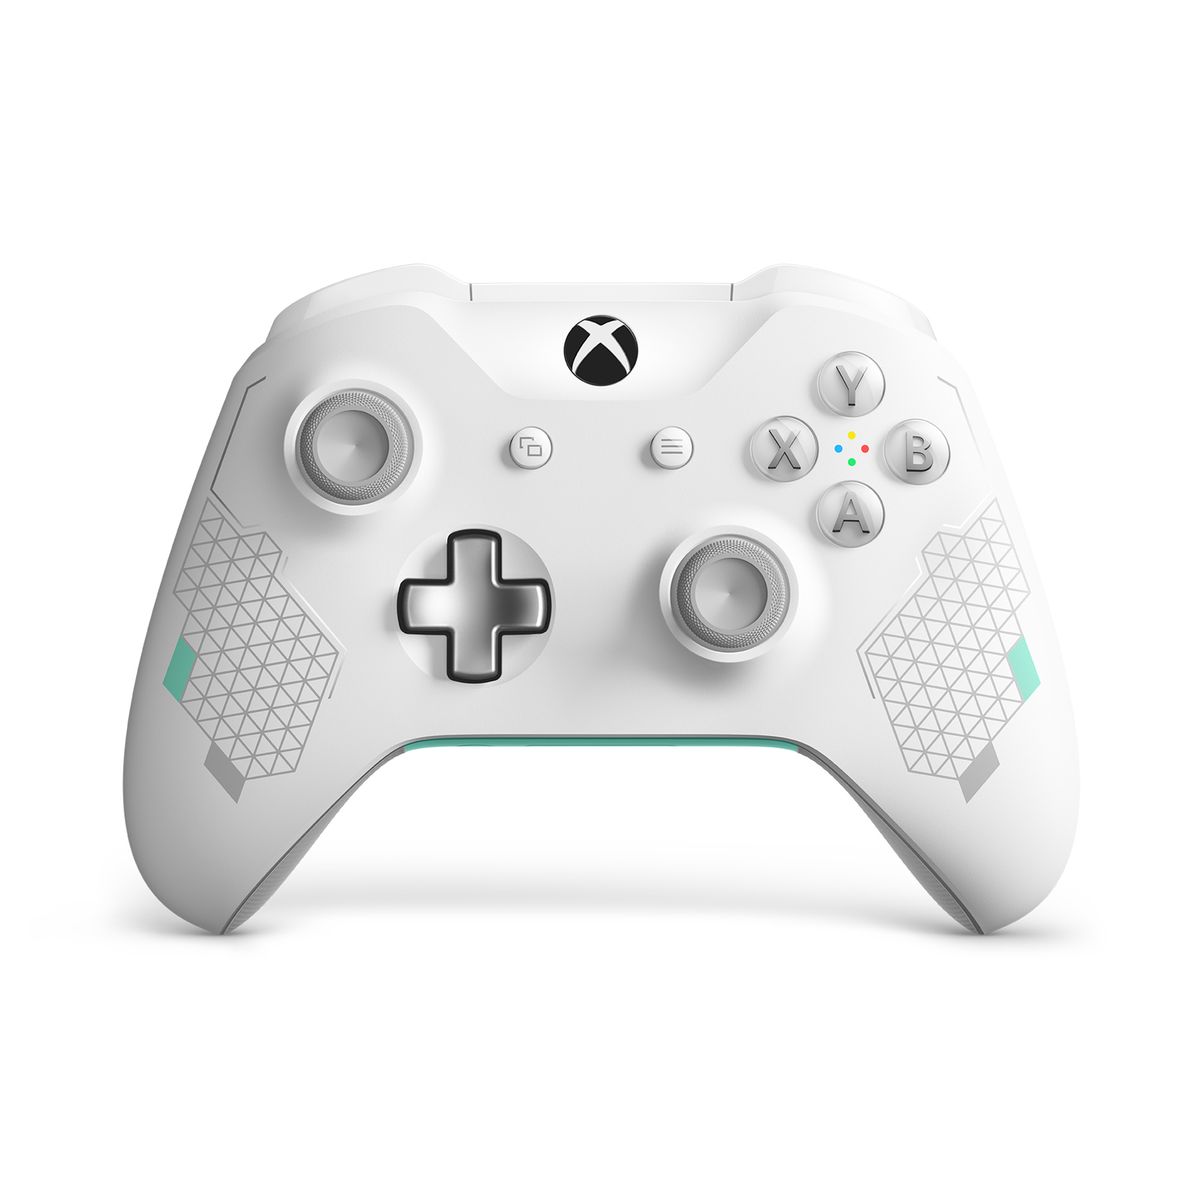 controller xbox one black friday